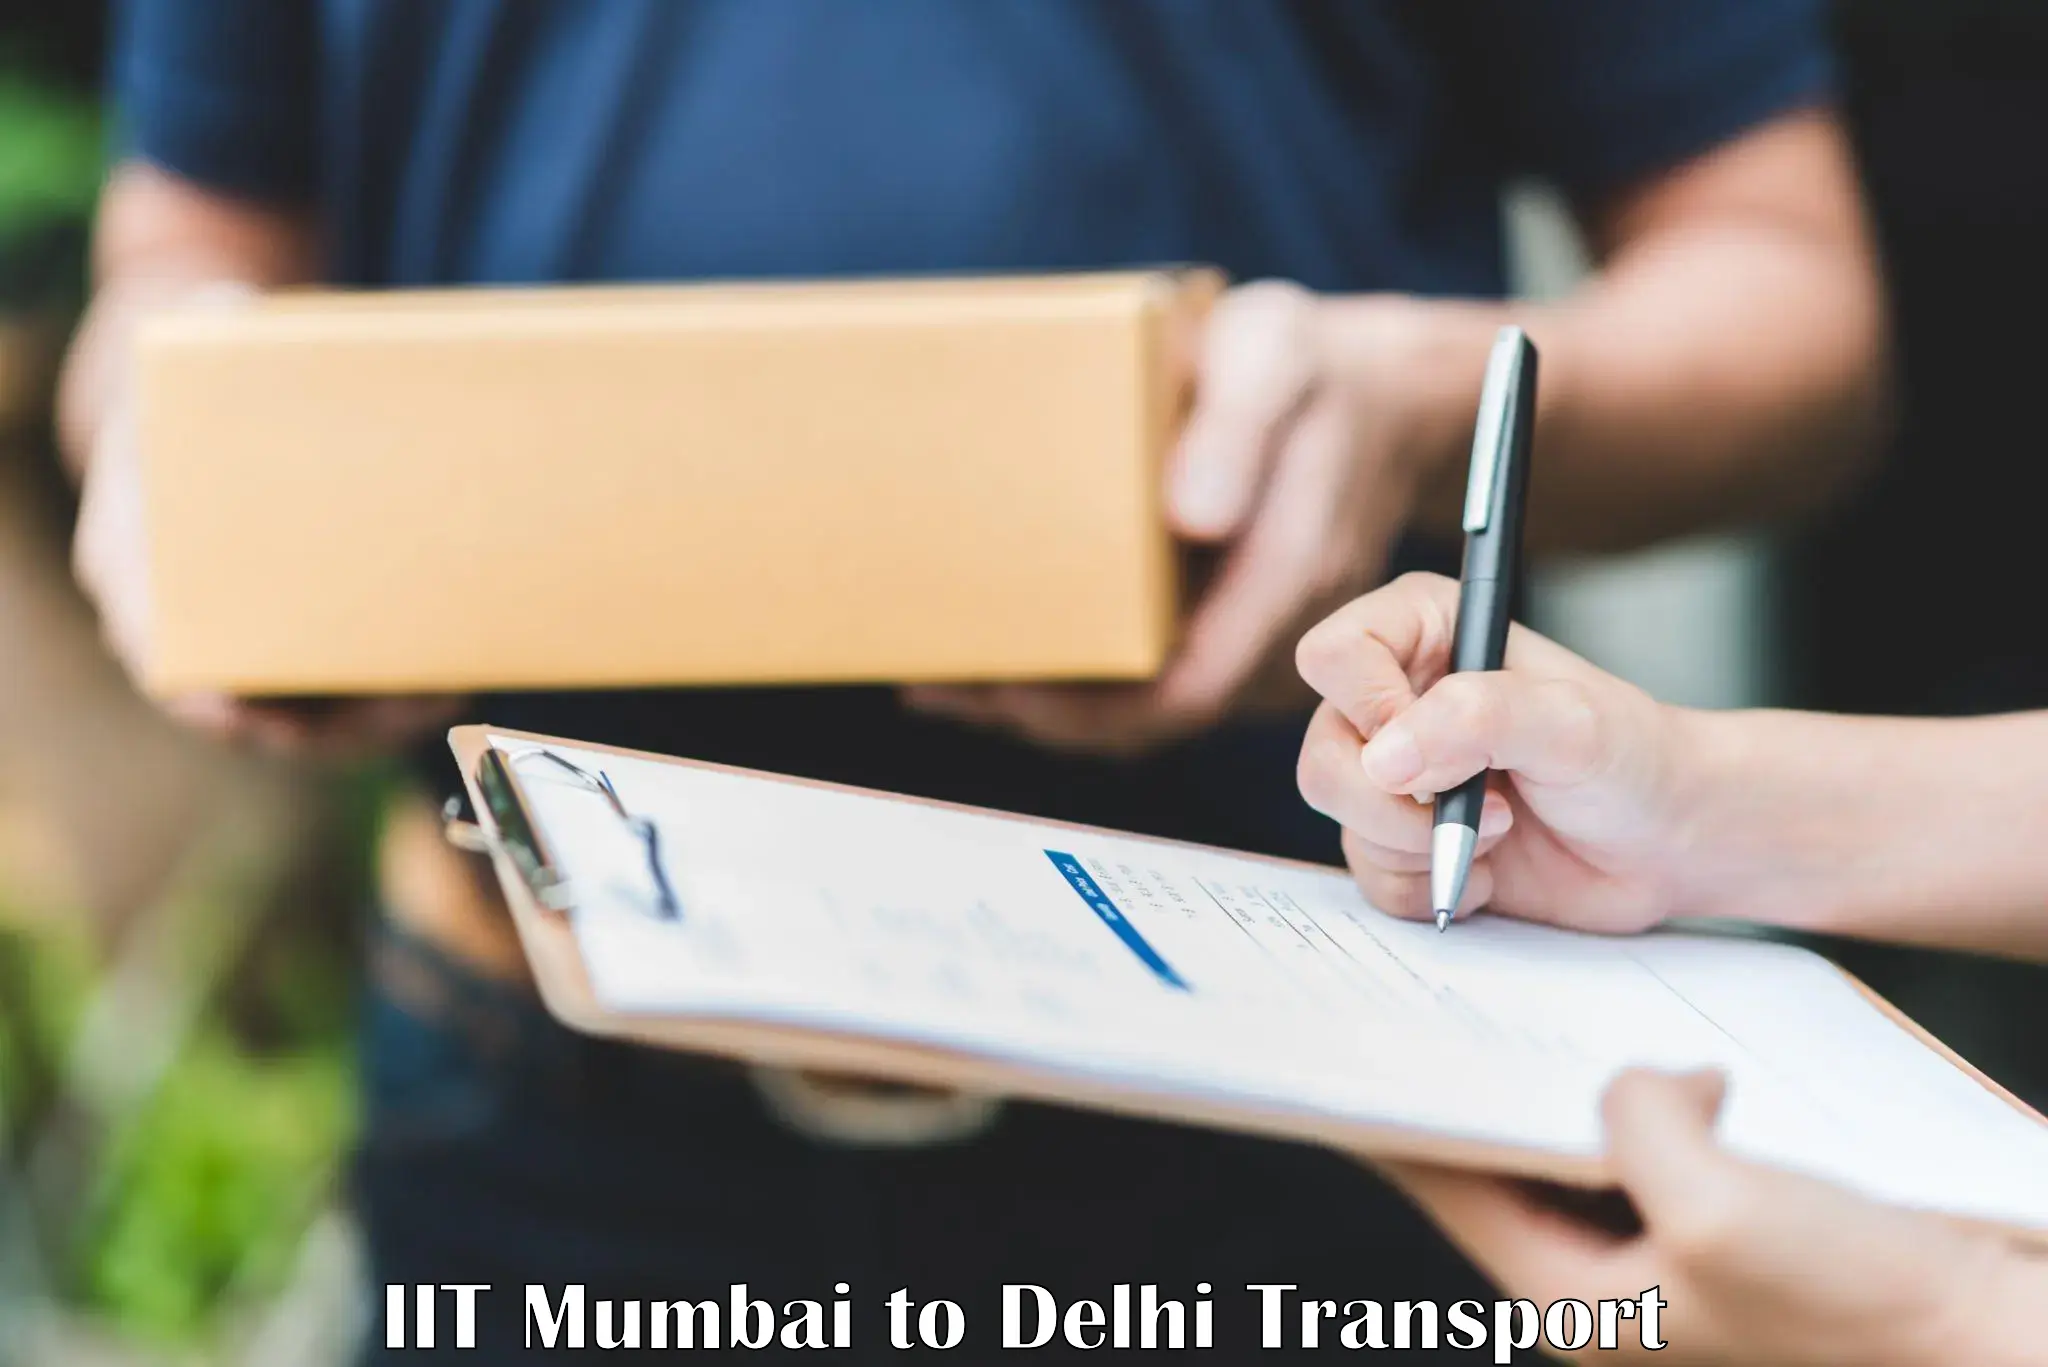 Container transport service IIT Mumbai to NCR